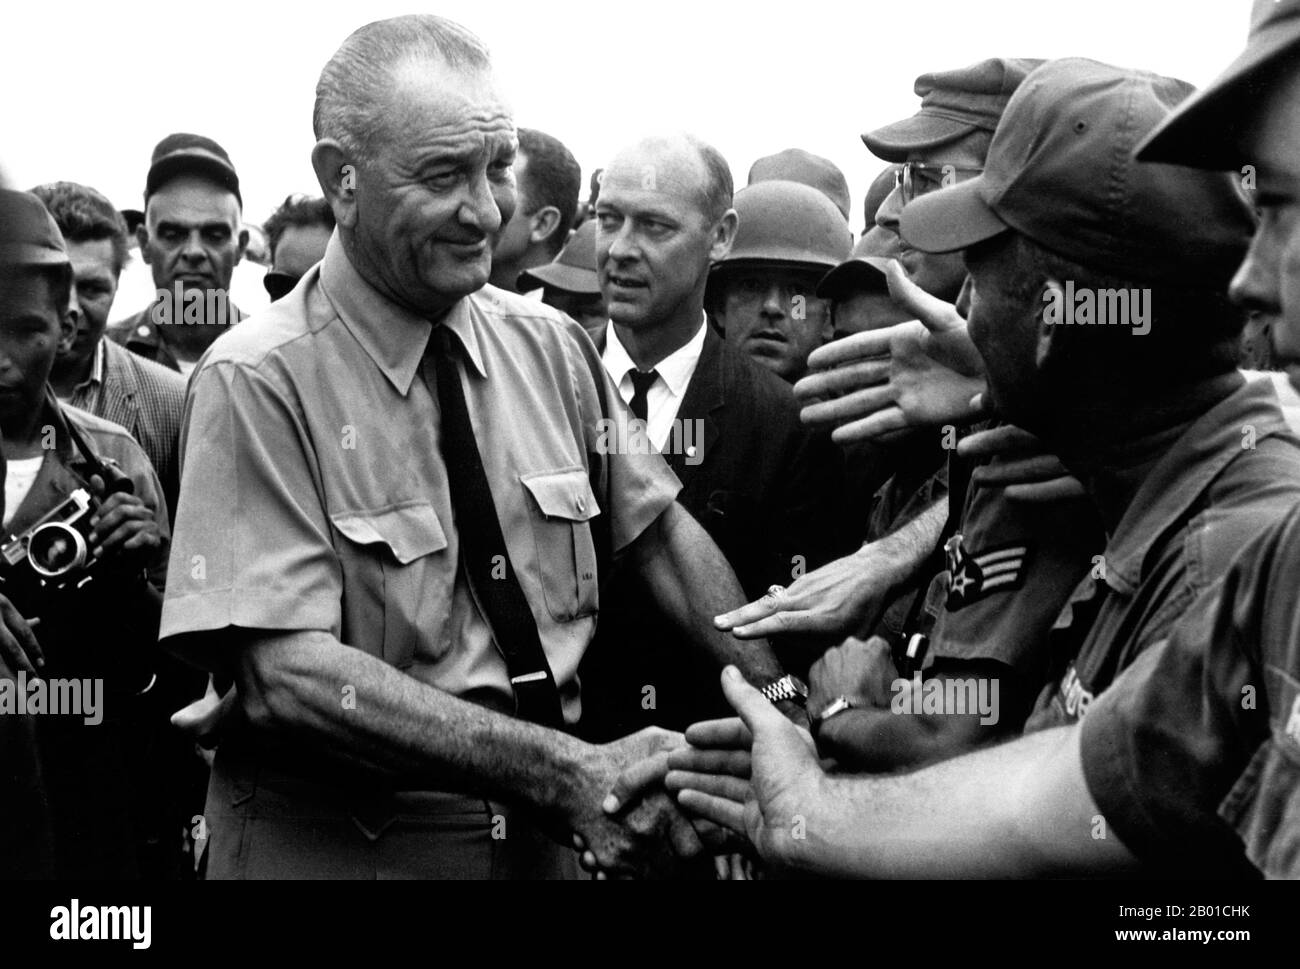 Vietnam: President Lyndon B. Johnson greets American troops at Saigon, 1966.  The Second Indochina War, known in America as the Vietnam War, was a Cold War era military conflict that occurred in Vietnam, Laos, and Cambodia from 1 November 1955 to the fall of Saigon on 30 April 1975. This war followed the First Indochina War and was fought between North Vietnam, supported by its communist allies, and the government of South Vietnam, supported by the U.S. and other anti-communist nations. The U.S. government viewed involvement in the war as a way to prevent a communist takeover of South Vietnam. Stock Photo